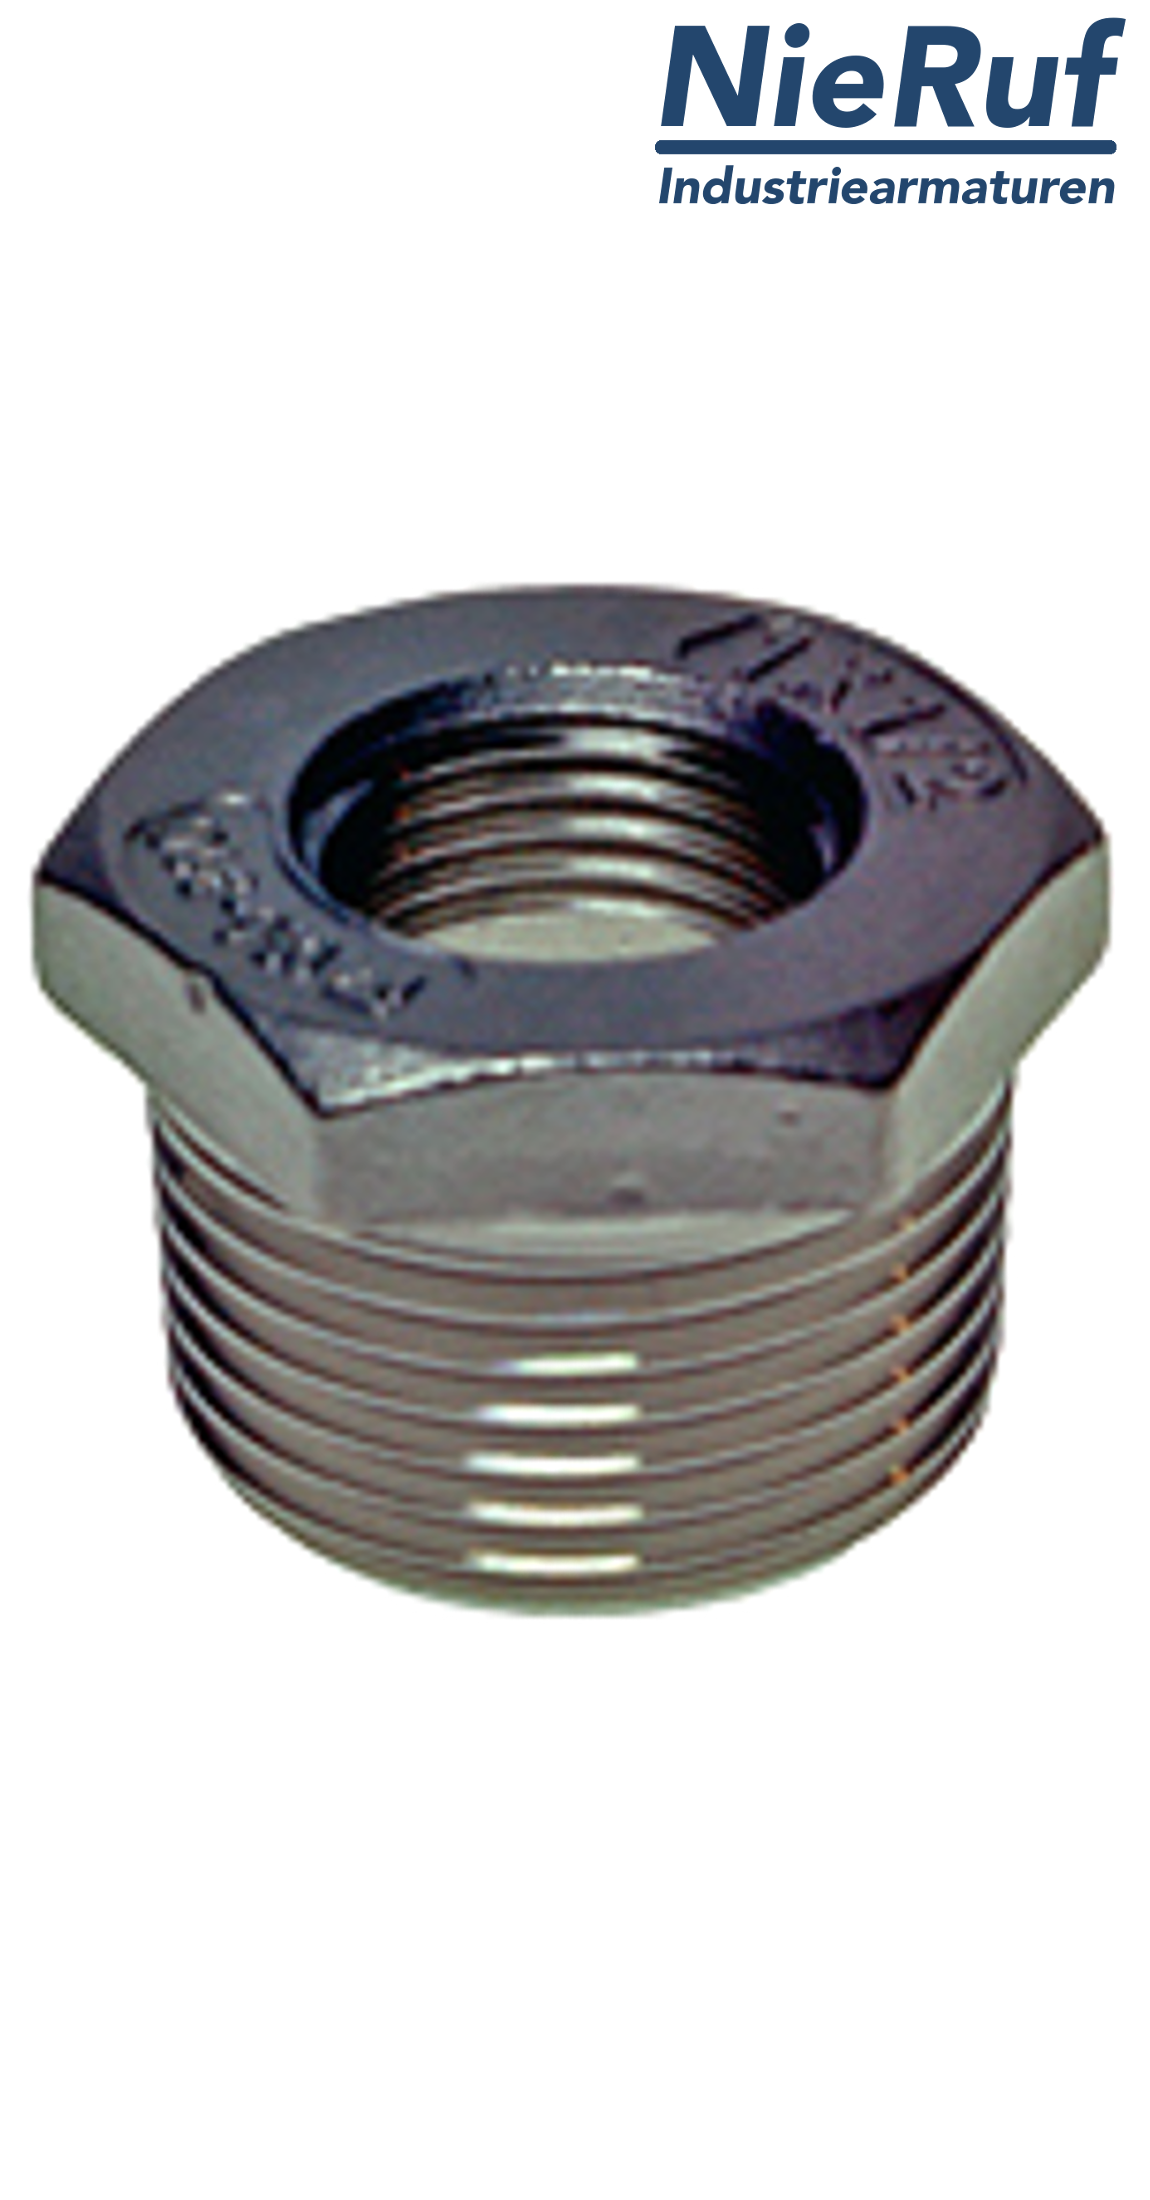 reducing bush 1/2" x 3/8" inch NPT male X female stainless steel 316L